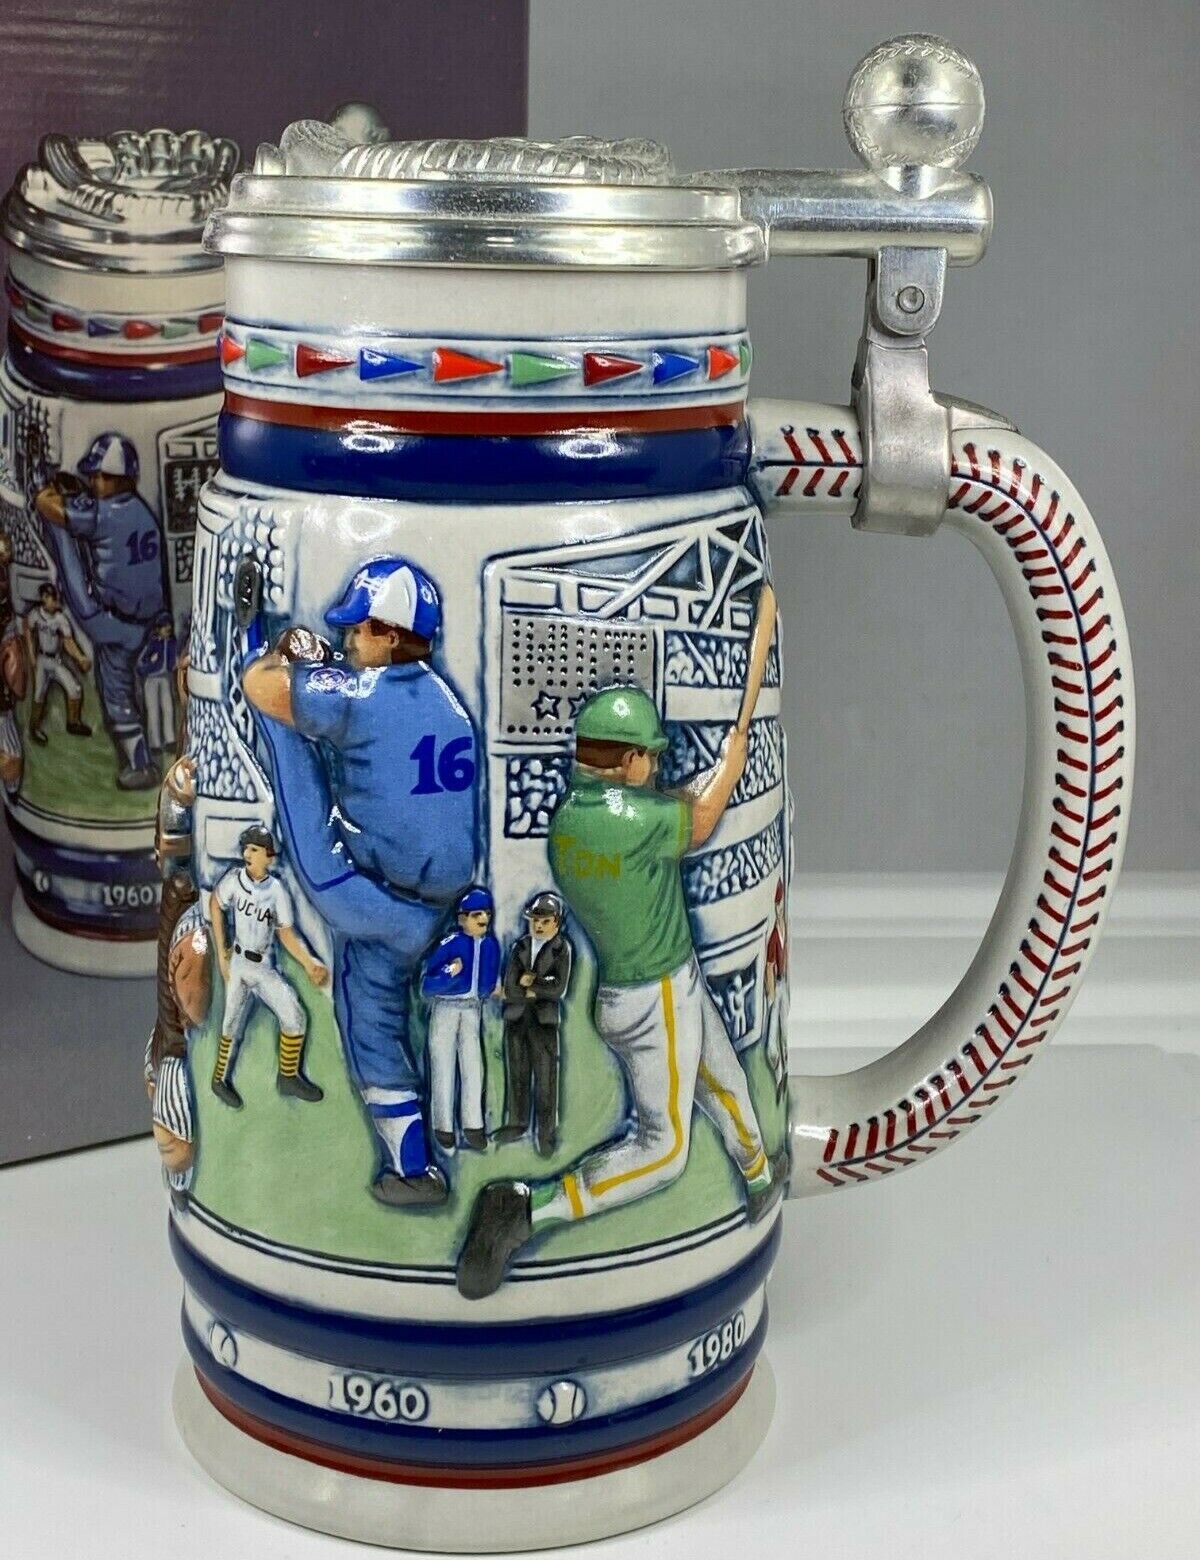 VINTAGE GREAT AMERICAN BASEBALL STEIN 1984 HANDCRAFTED BY CERAMARTE BRAZIL NEW